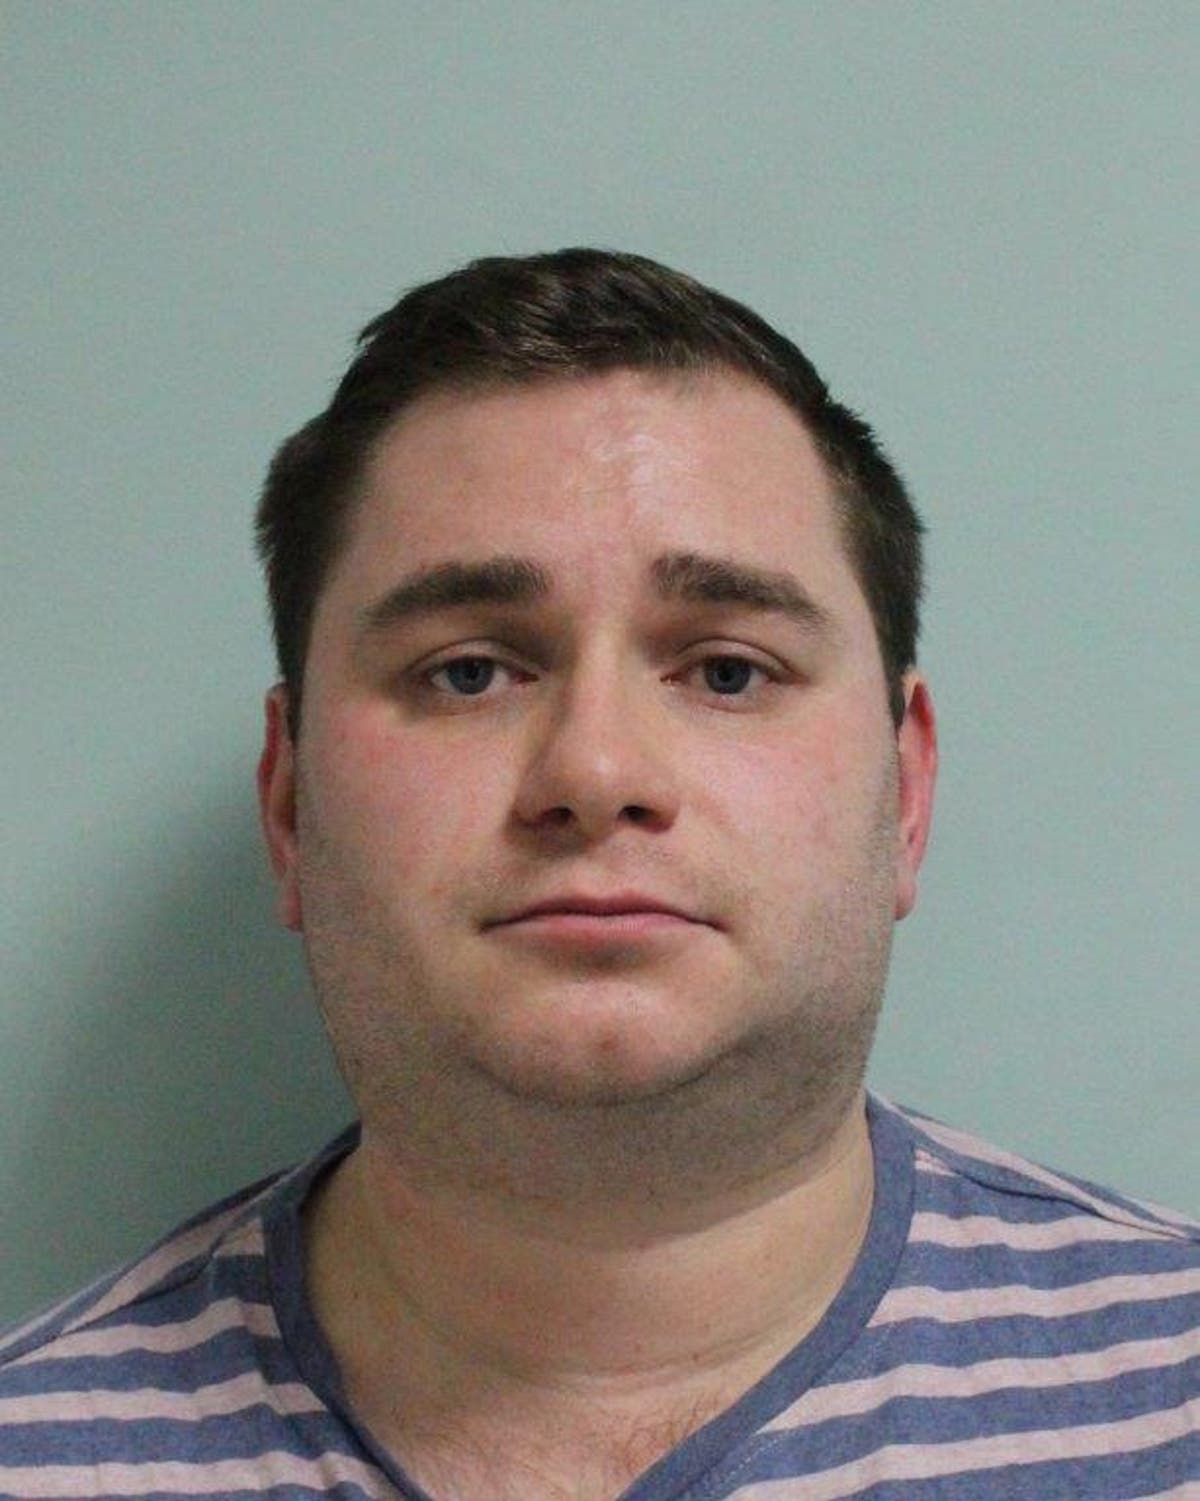 Former Met PC convicted of child sexual offences after sending images to undercover officer